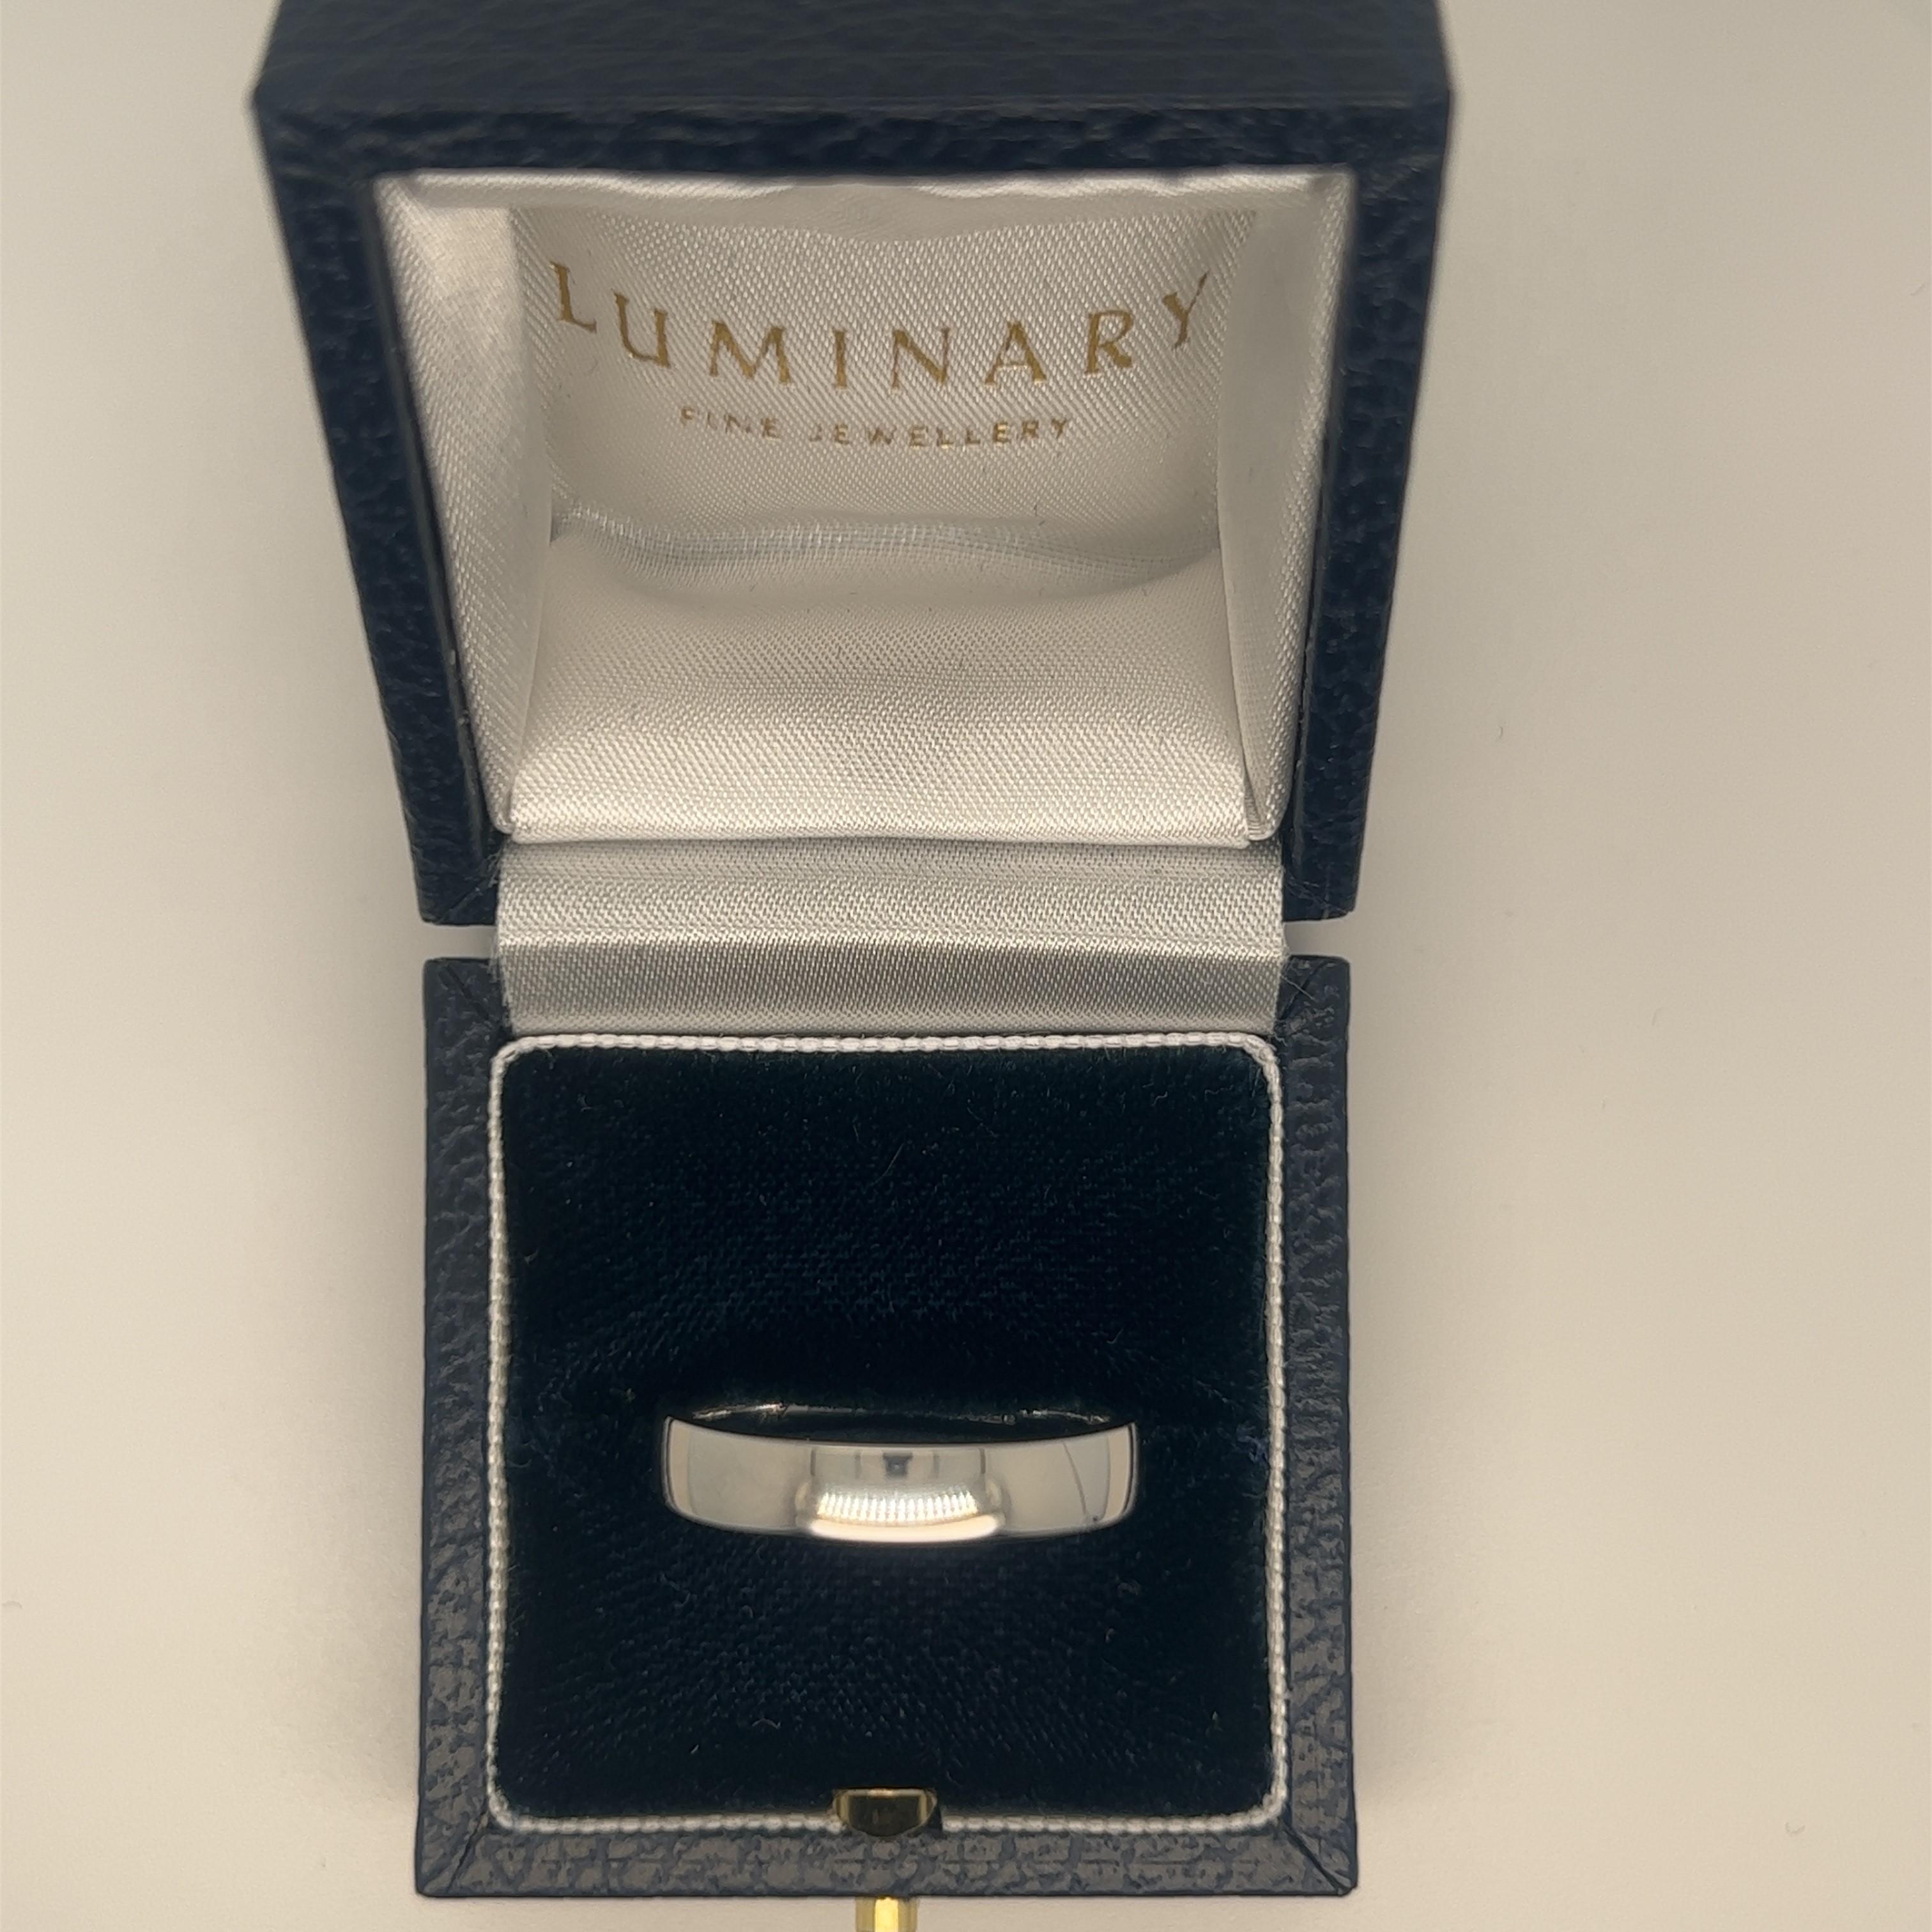 Platinum 4mm band Handcrafted in London; our low-domed modern court profile features a softened comfort fit lining, presented in a medium gauge.

Size 9 US: Size S UK Size 60 European.

Can be re-sized up and down 2 Sizes.

For Bespoke sizing,